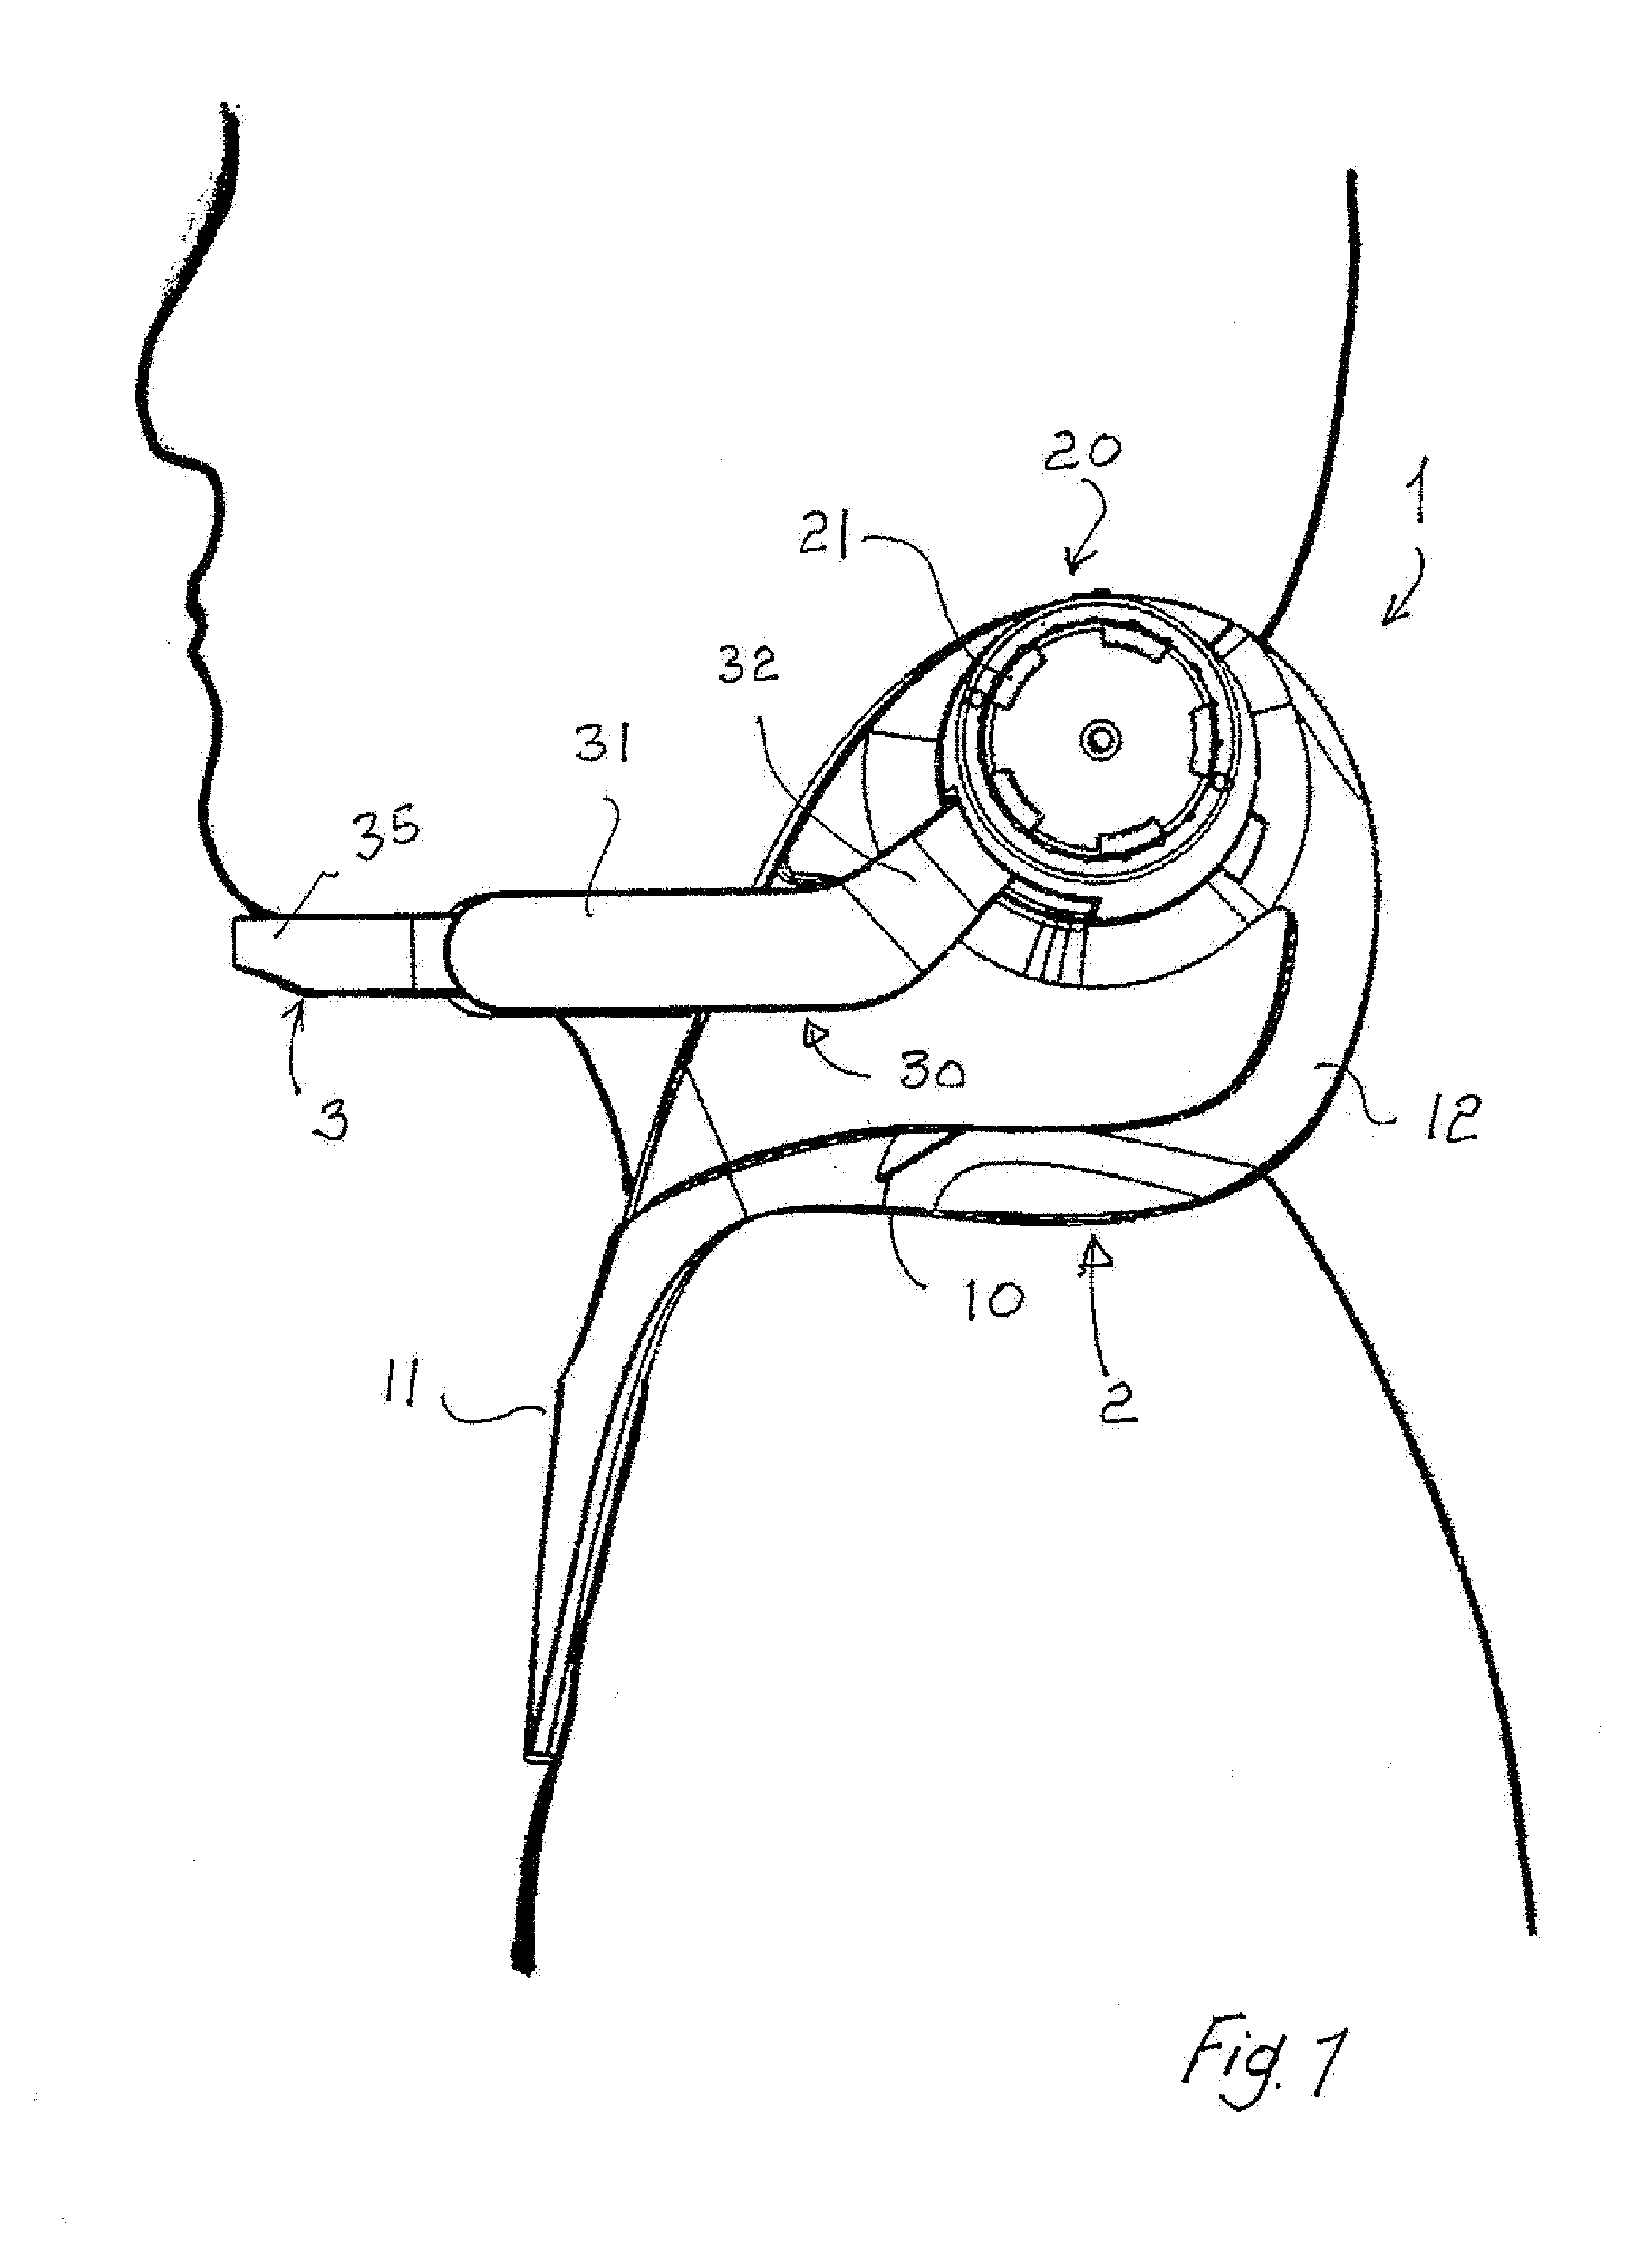 Therapeutic device for neck pain